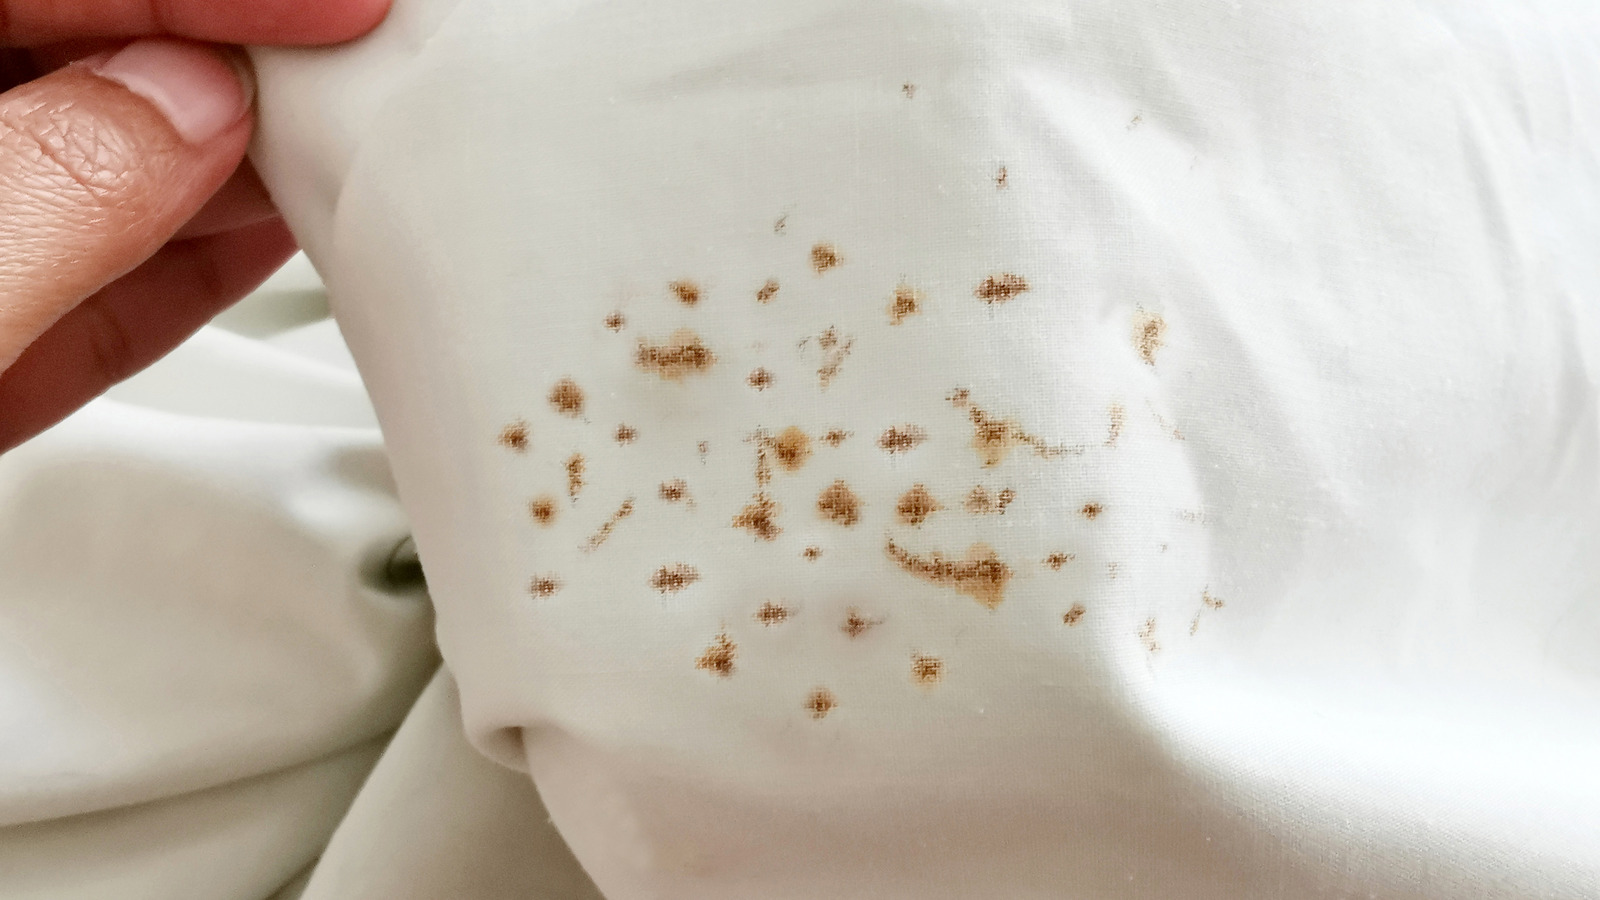 How to Remove Rust Stains from Clothes